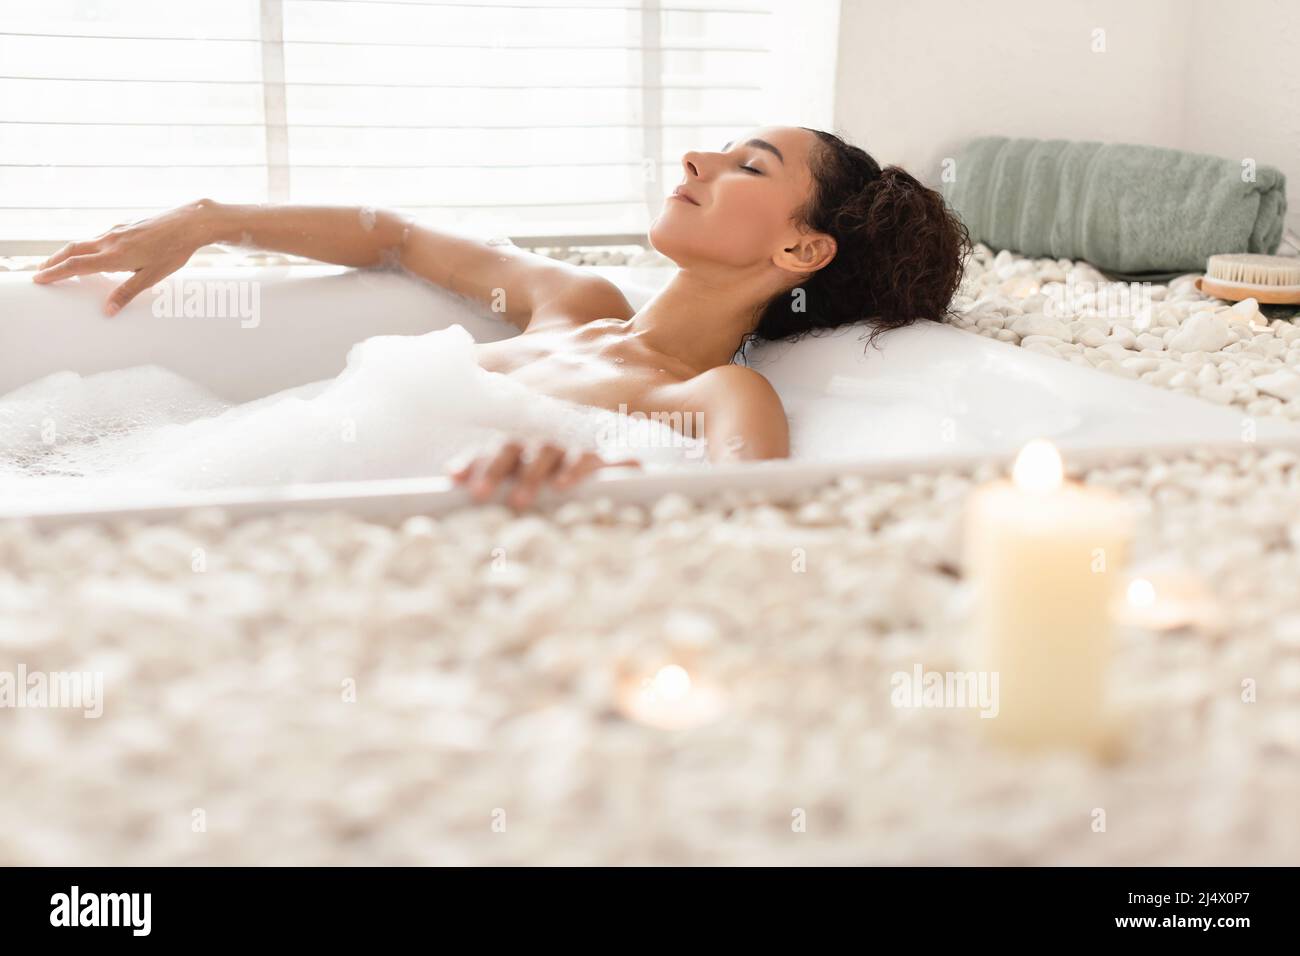 Tub Foamy Water Soft Bath Pillow Surrounded Candles Indoors Stock Photo by  ©NewAfrica 574423092